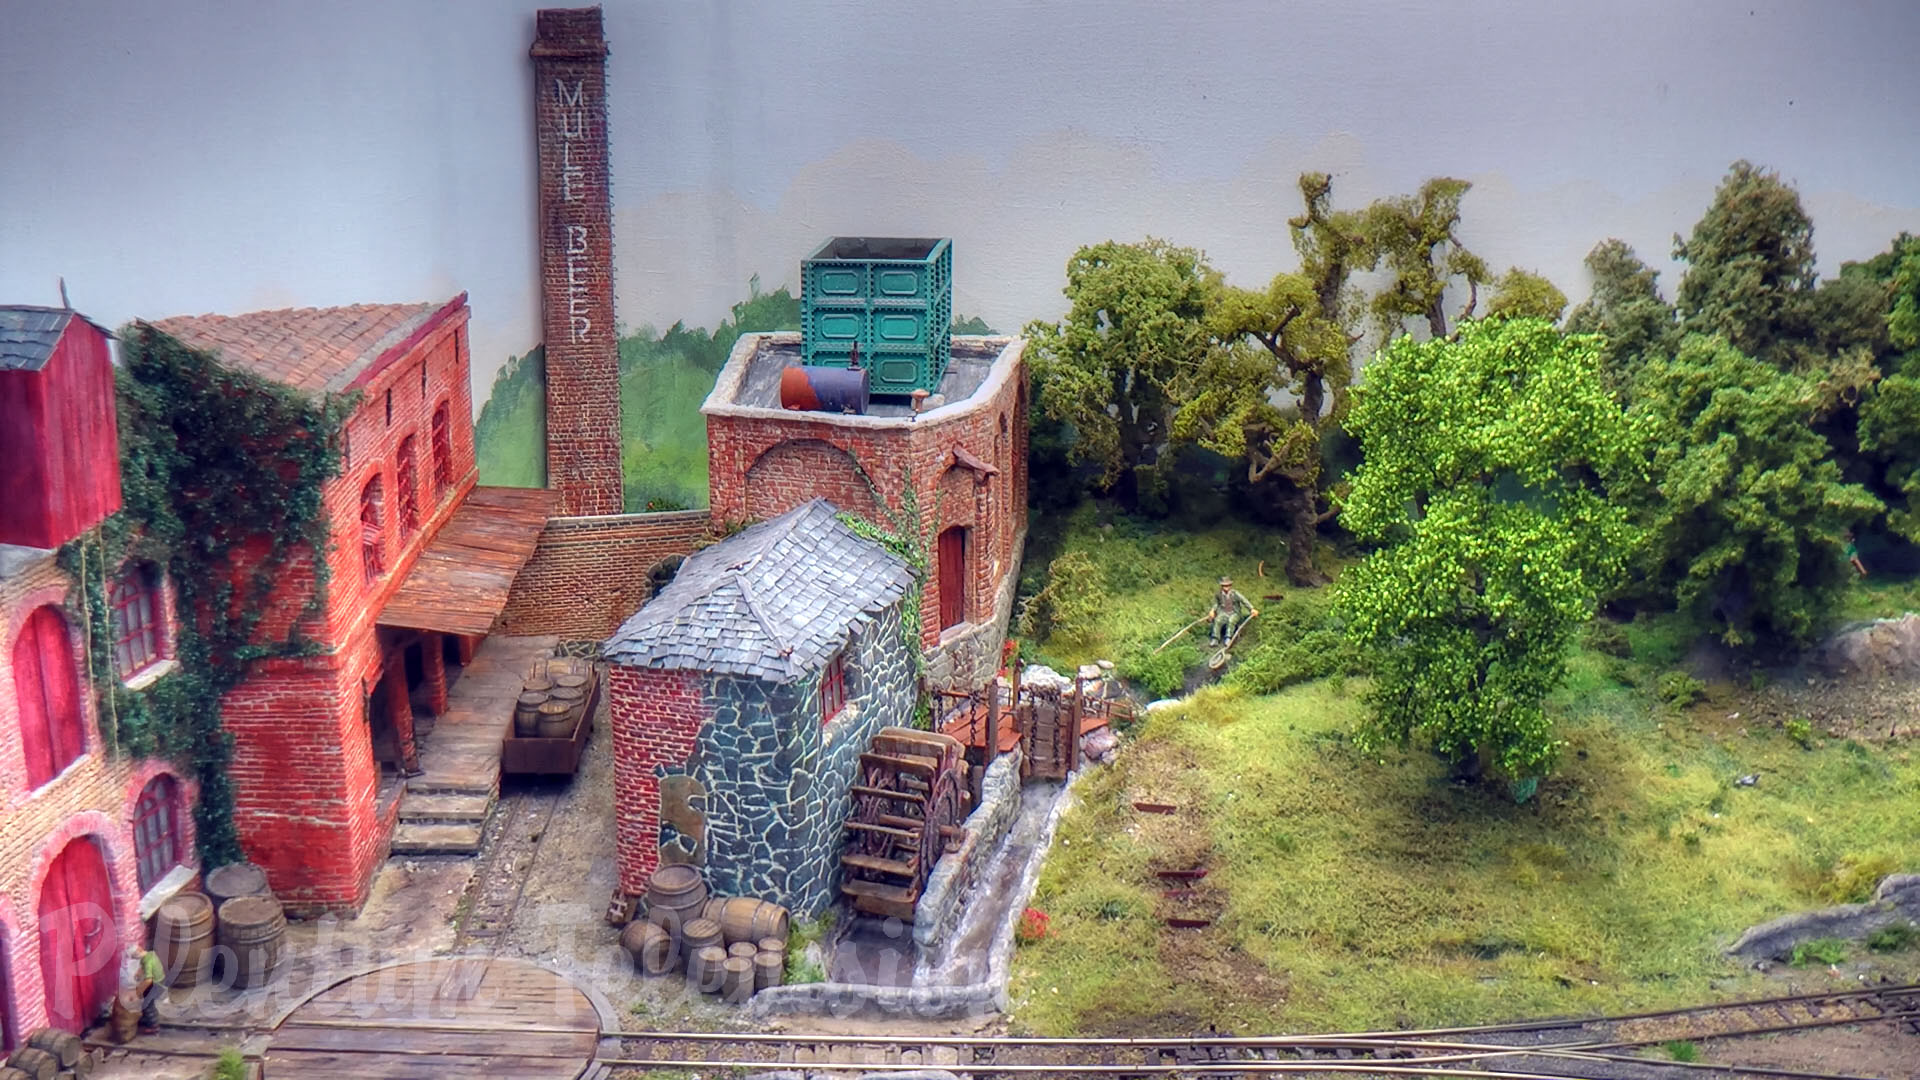 One of the Most Detailed Model Railway Layouts in Narrow Gauge O Scale - Old England by Samuel de Zutter